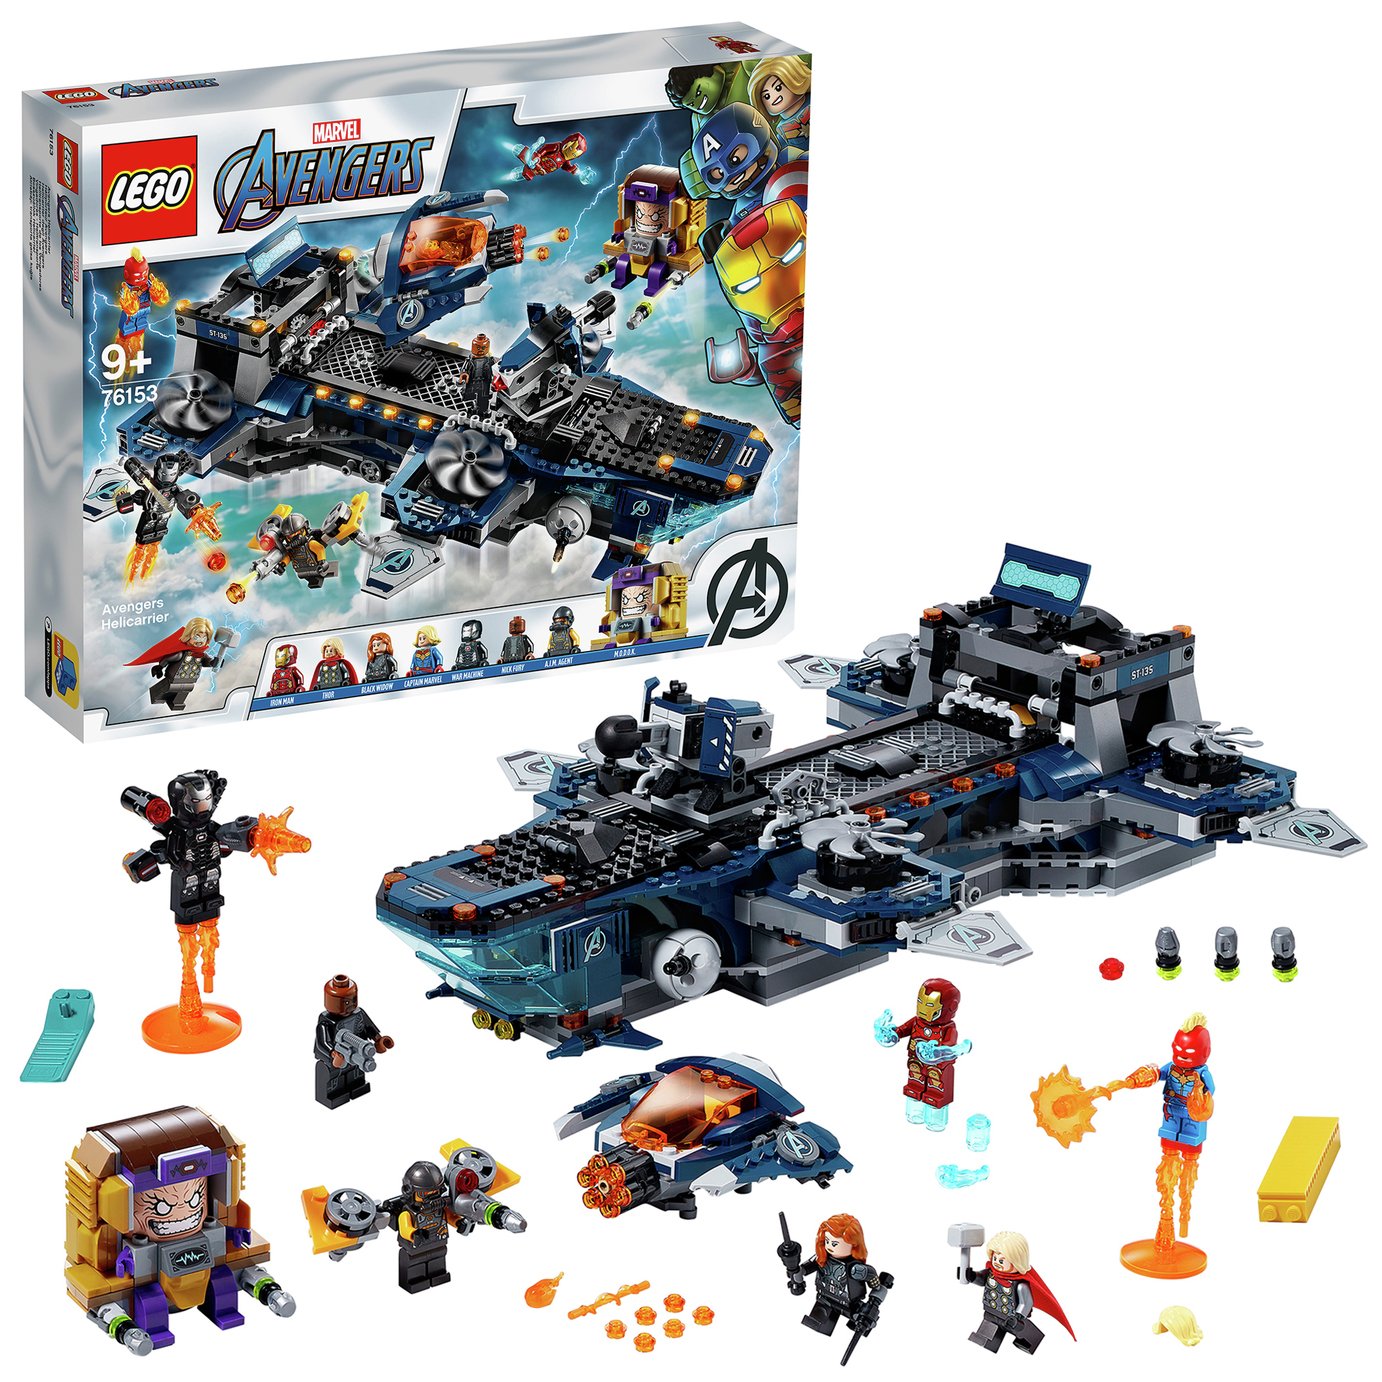 LEGO Marvel Avengers Helicarrier Toy- 76153 Review